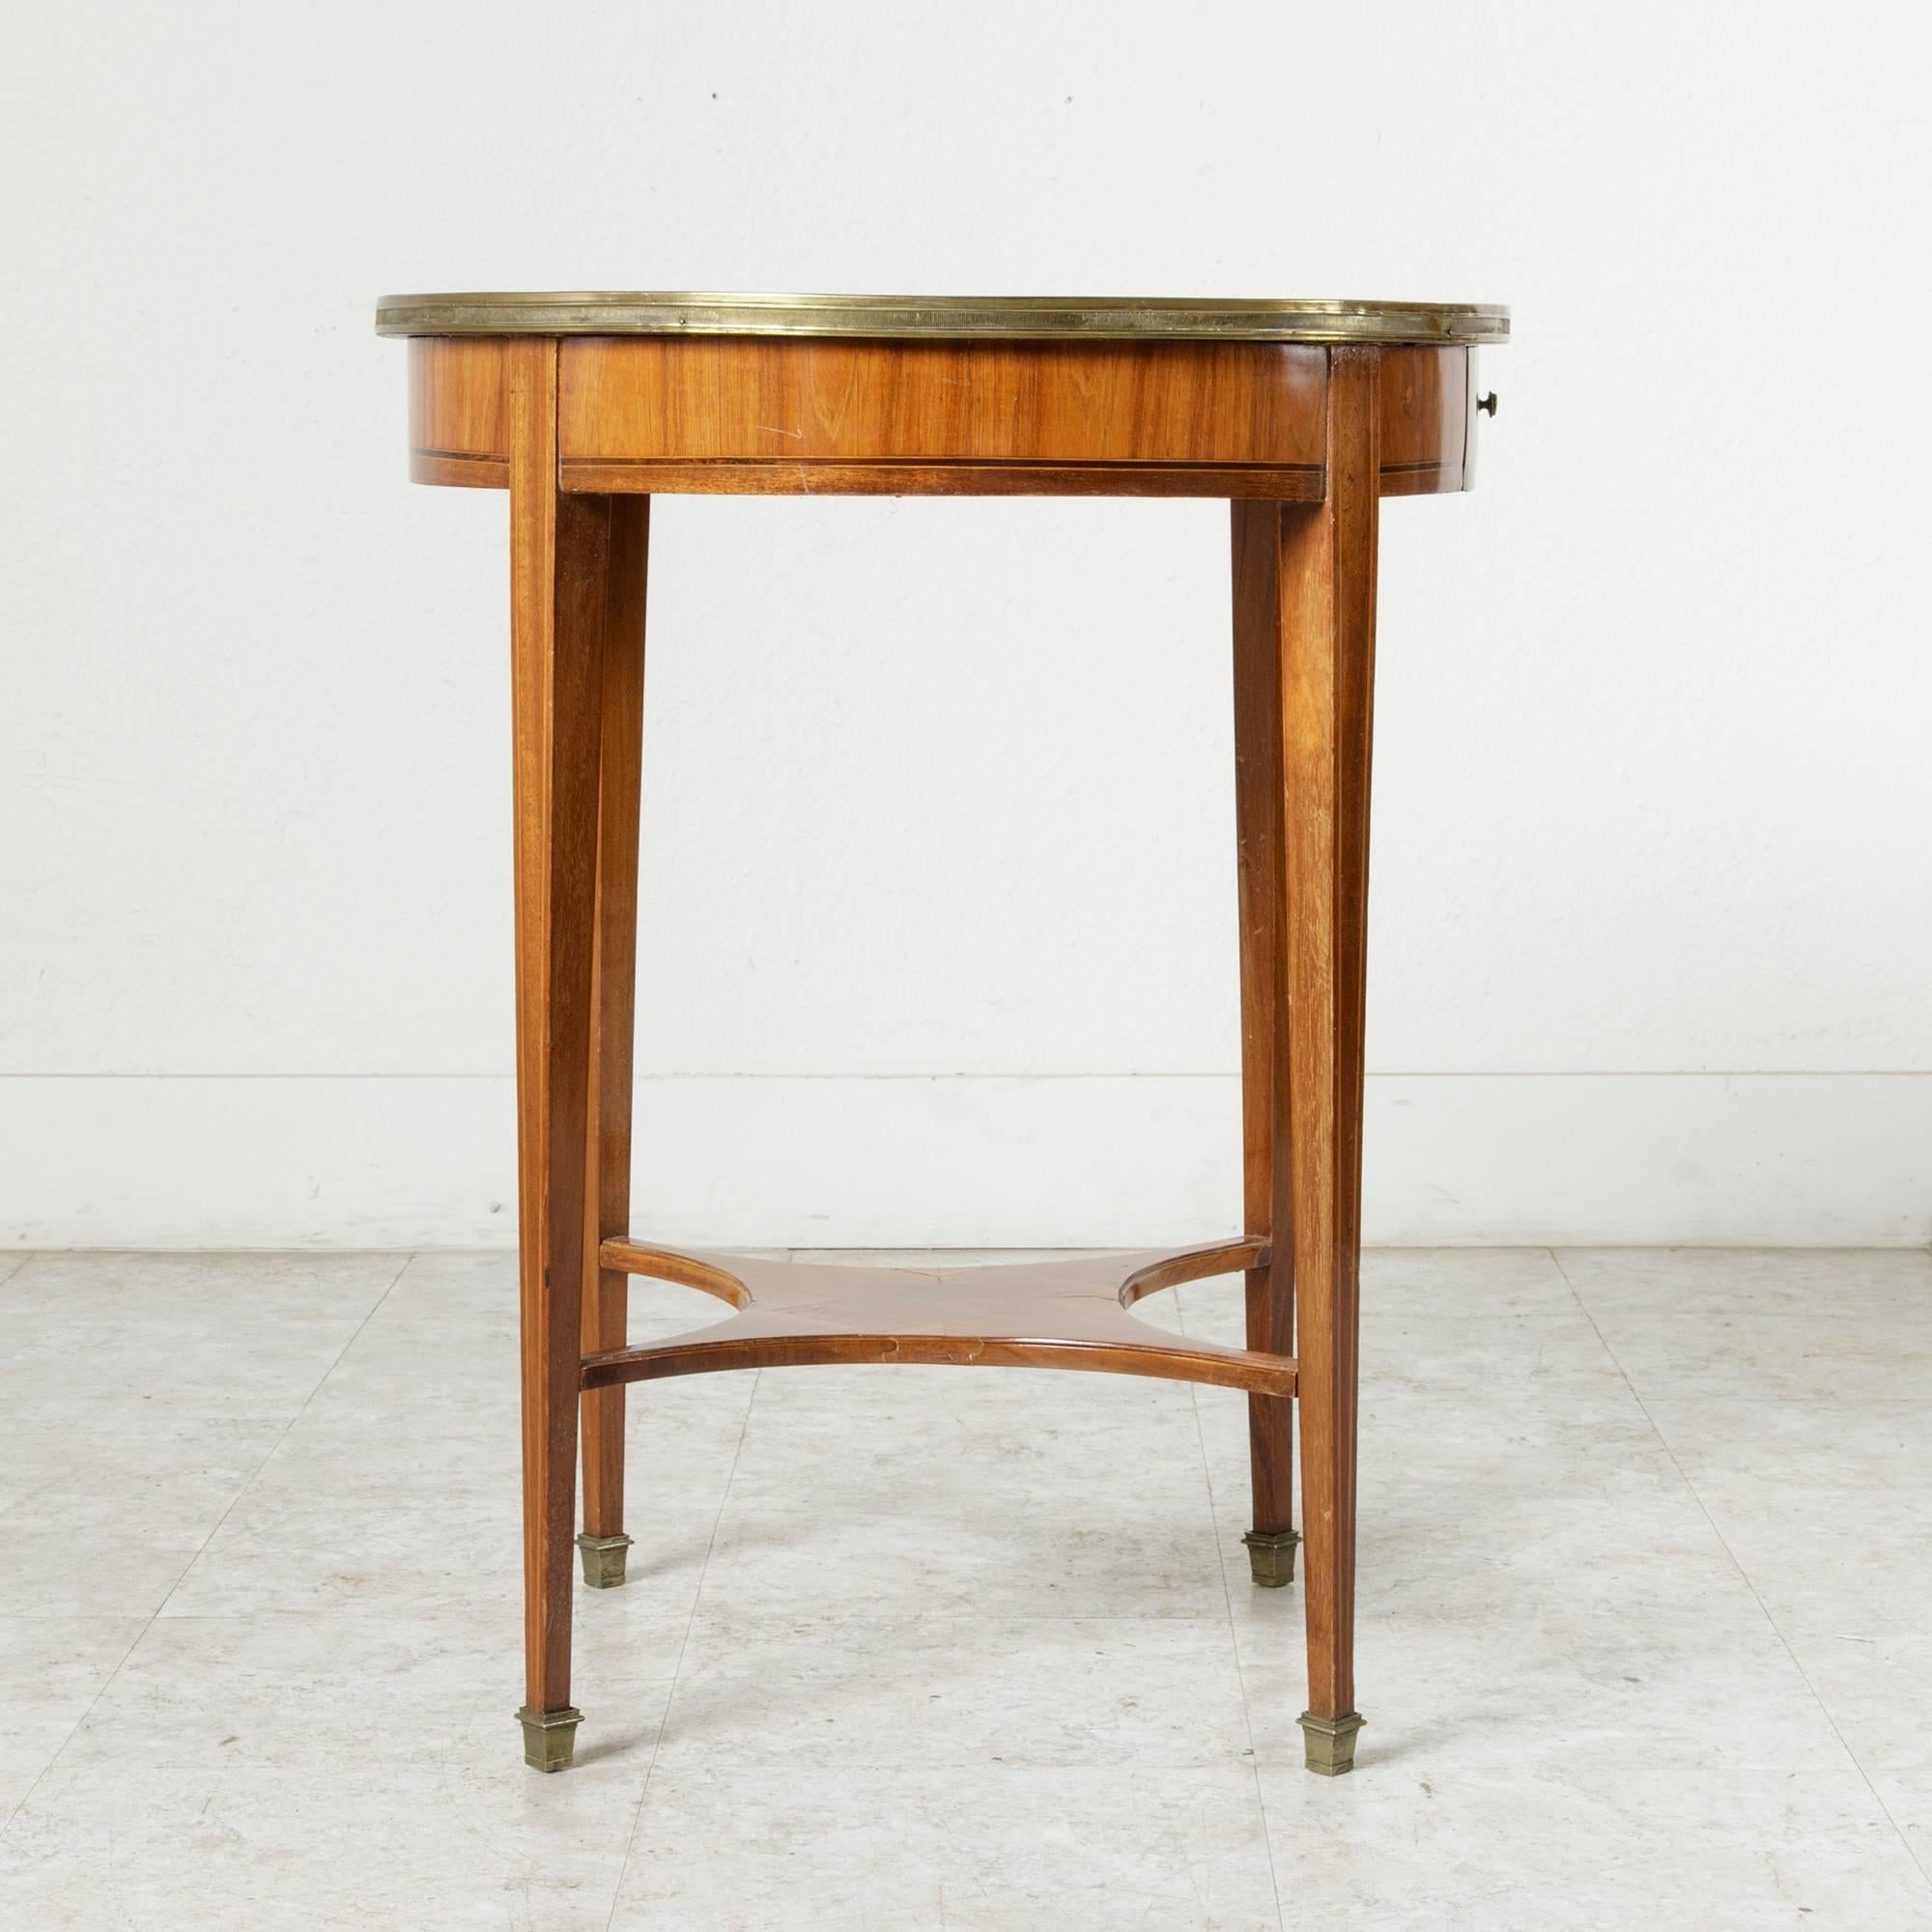 Art Deco Period Rosewood and Walnut Marquetry Gueridon or Side Table, Brass Trim 1